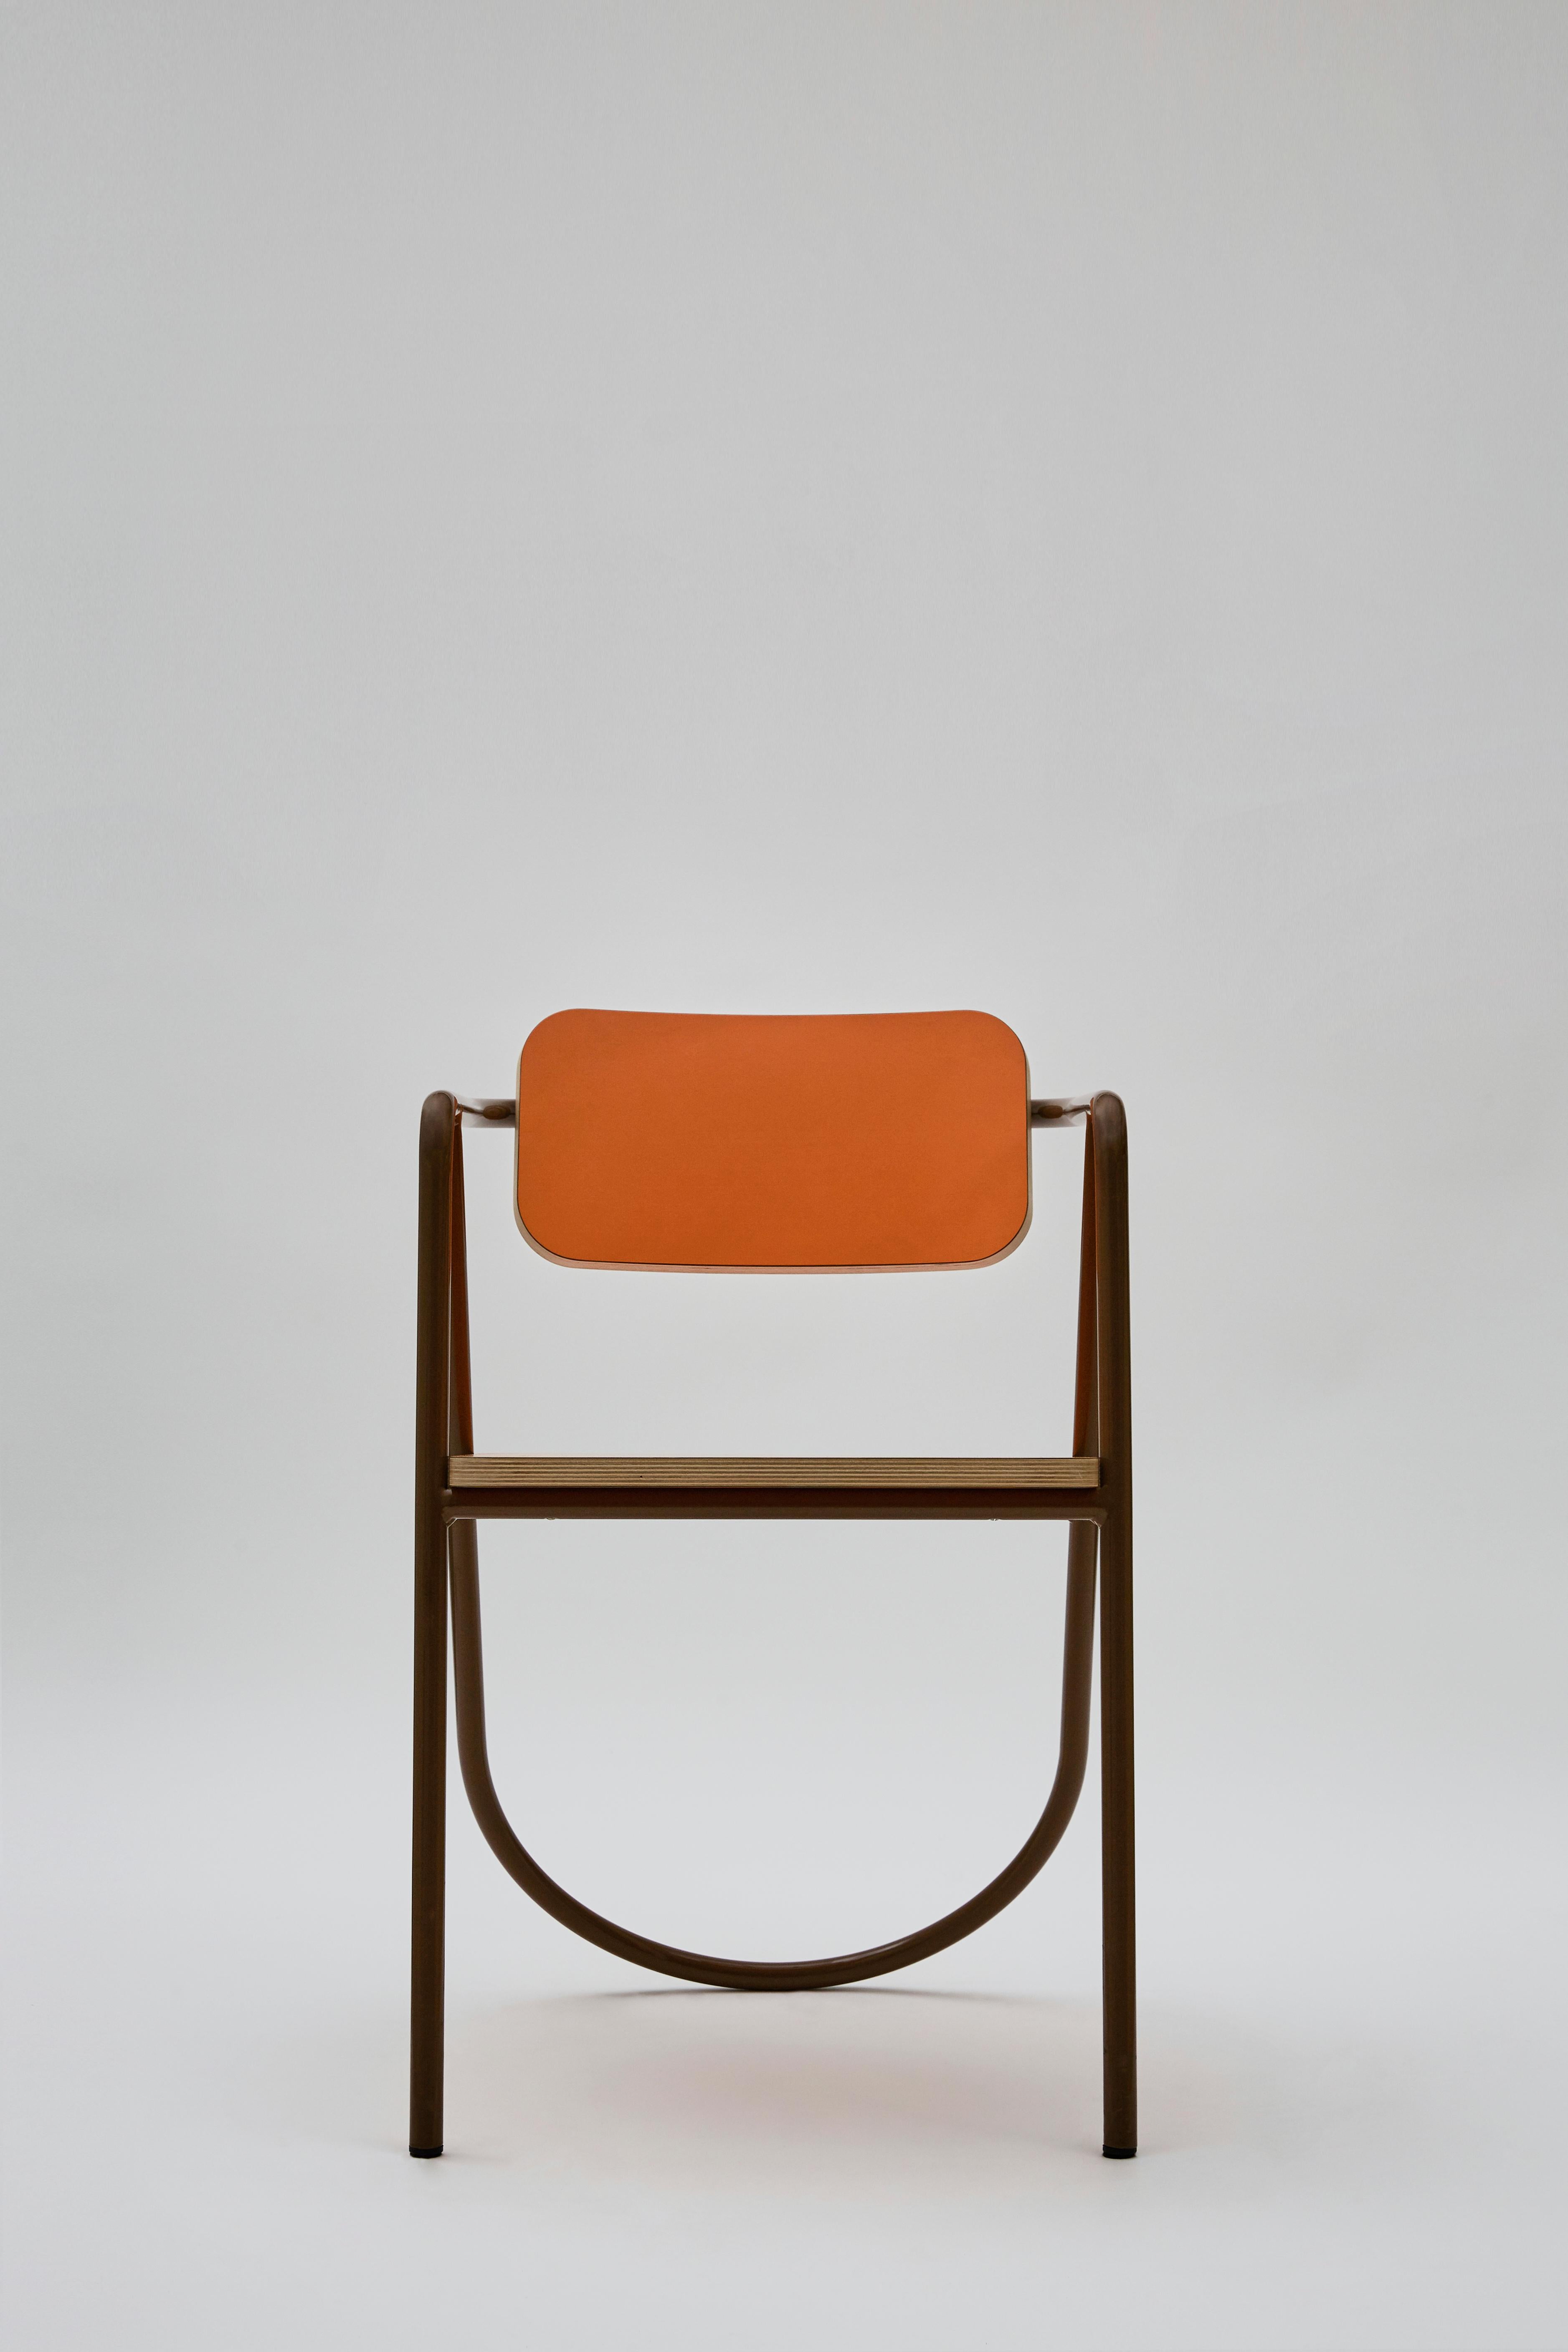 Vintage and contemporary references merge in this sculptural armchair from the La Misciù Collection. The wooden backrest and seat, softened by rounded corners and accented with a vivid orange shade, are fitted to a dramatic tubular steel frame